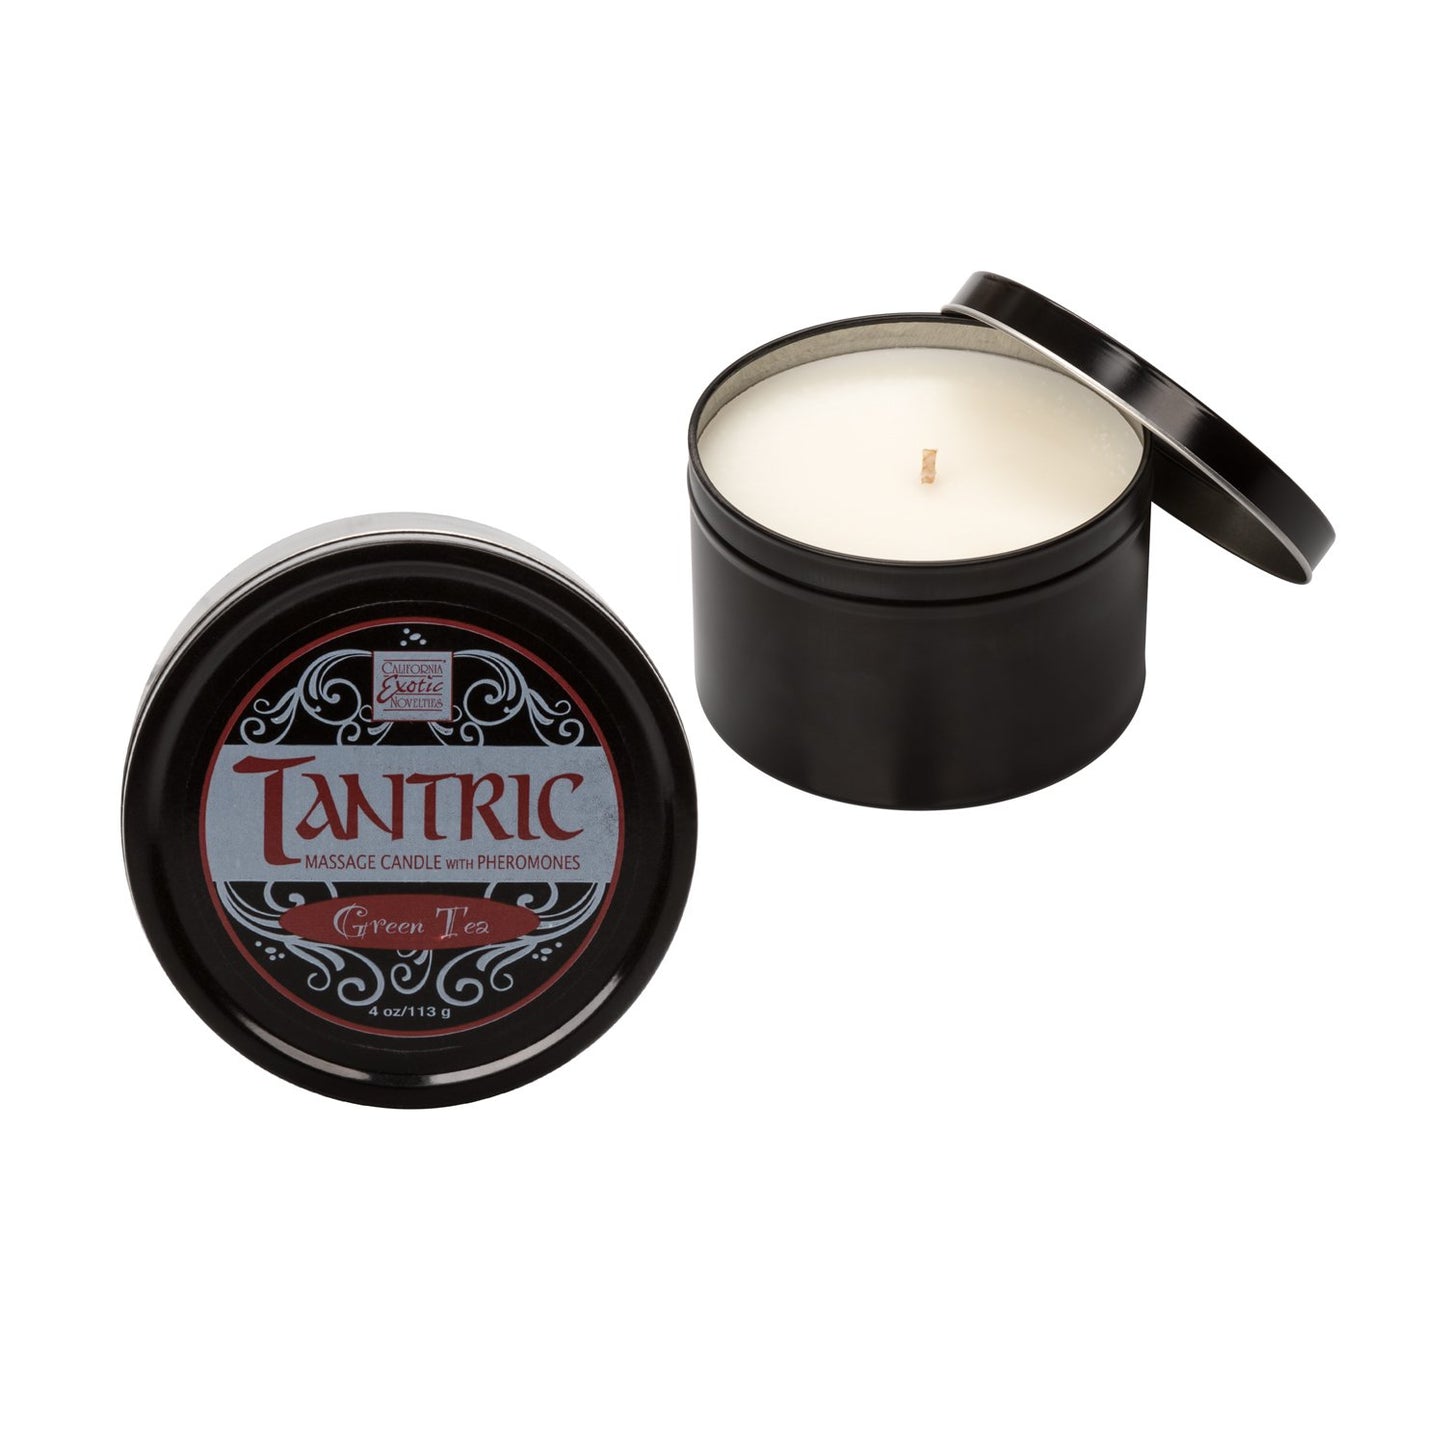 Tantric Soy Massage Candle with Pheromones Green Tea